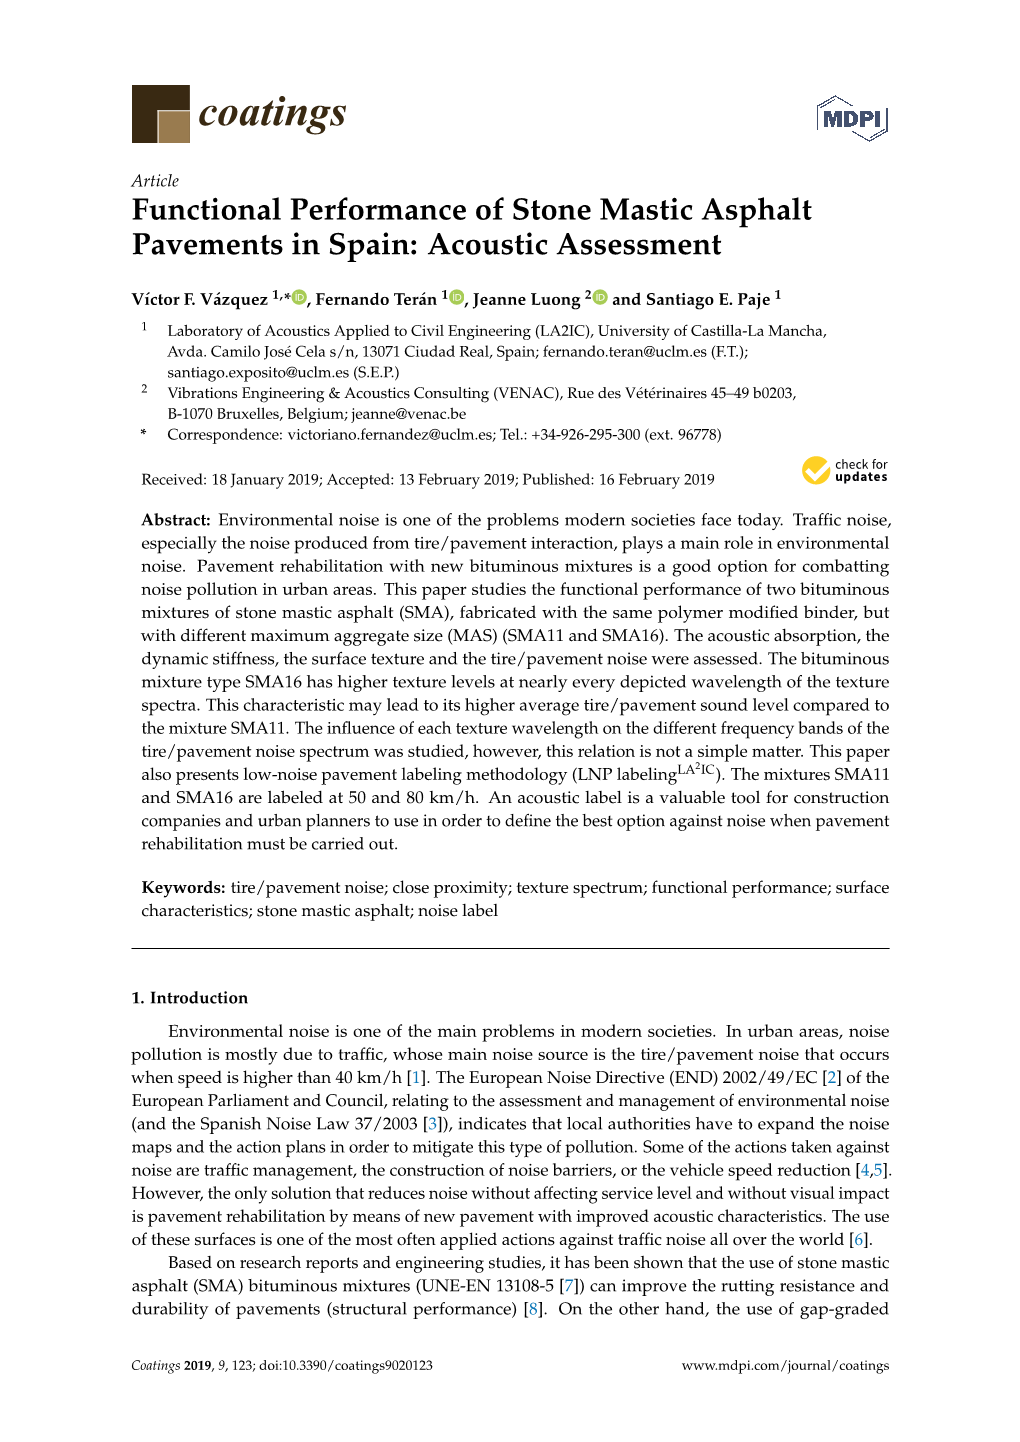 Functional Performance of Stone Mastic Asphalt Pavements in Spain: Acoustic Assessment